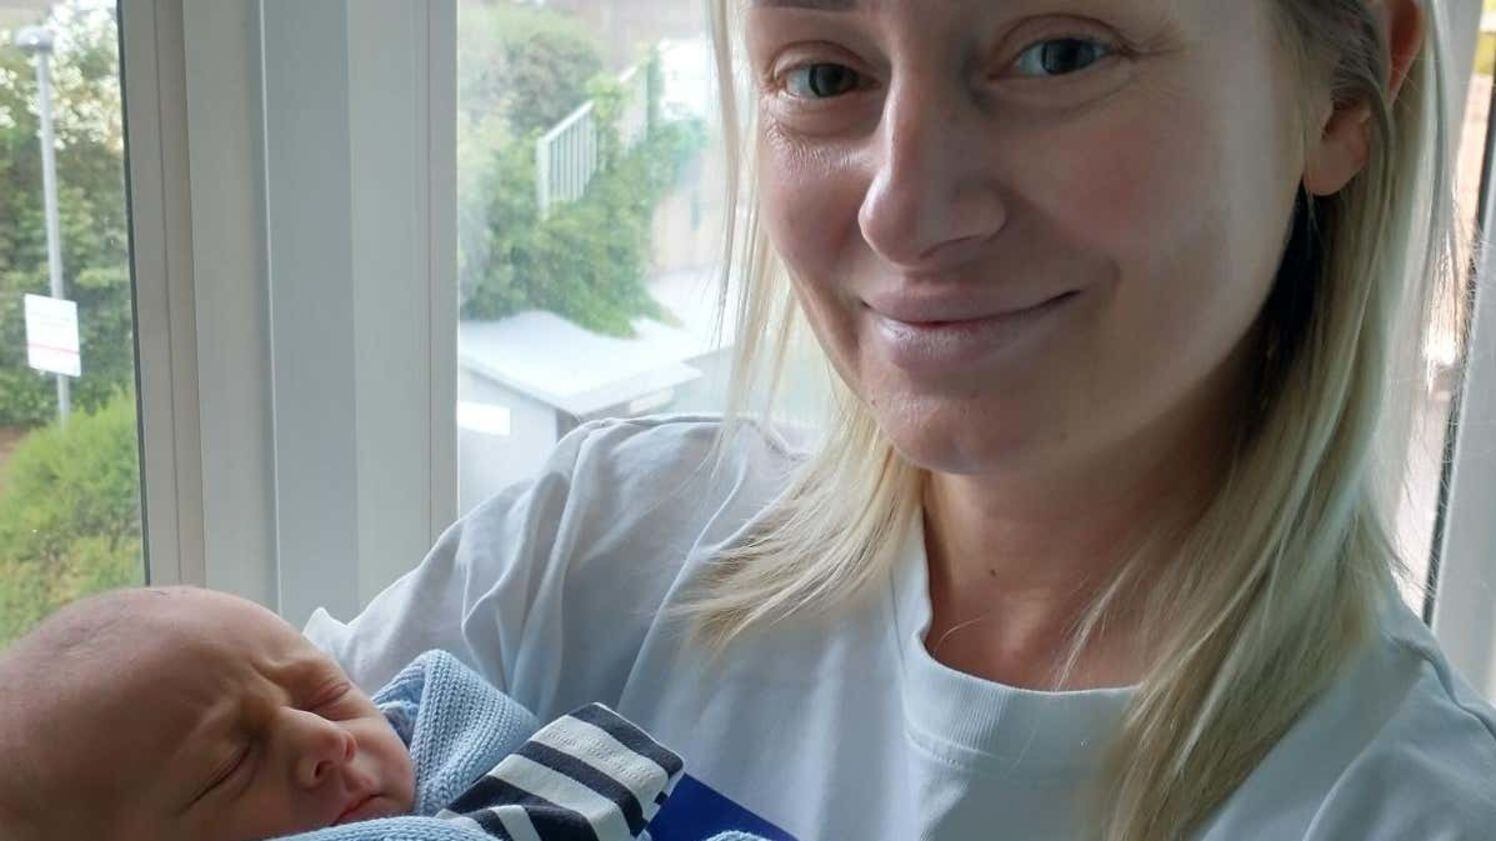 Lesia Husar gave birth at Nottingham City hospital after travelling more than 1,200 miles from her home in Chernivsti, Ukraine.